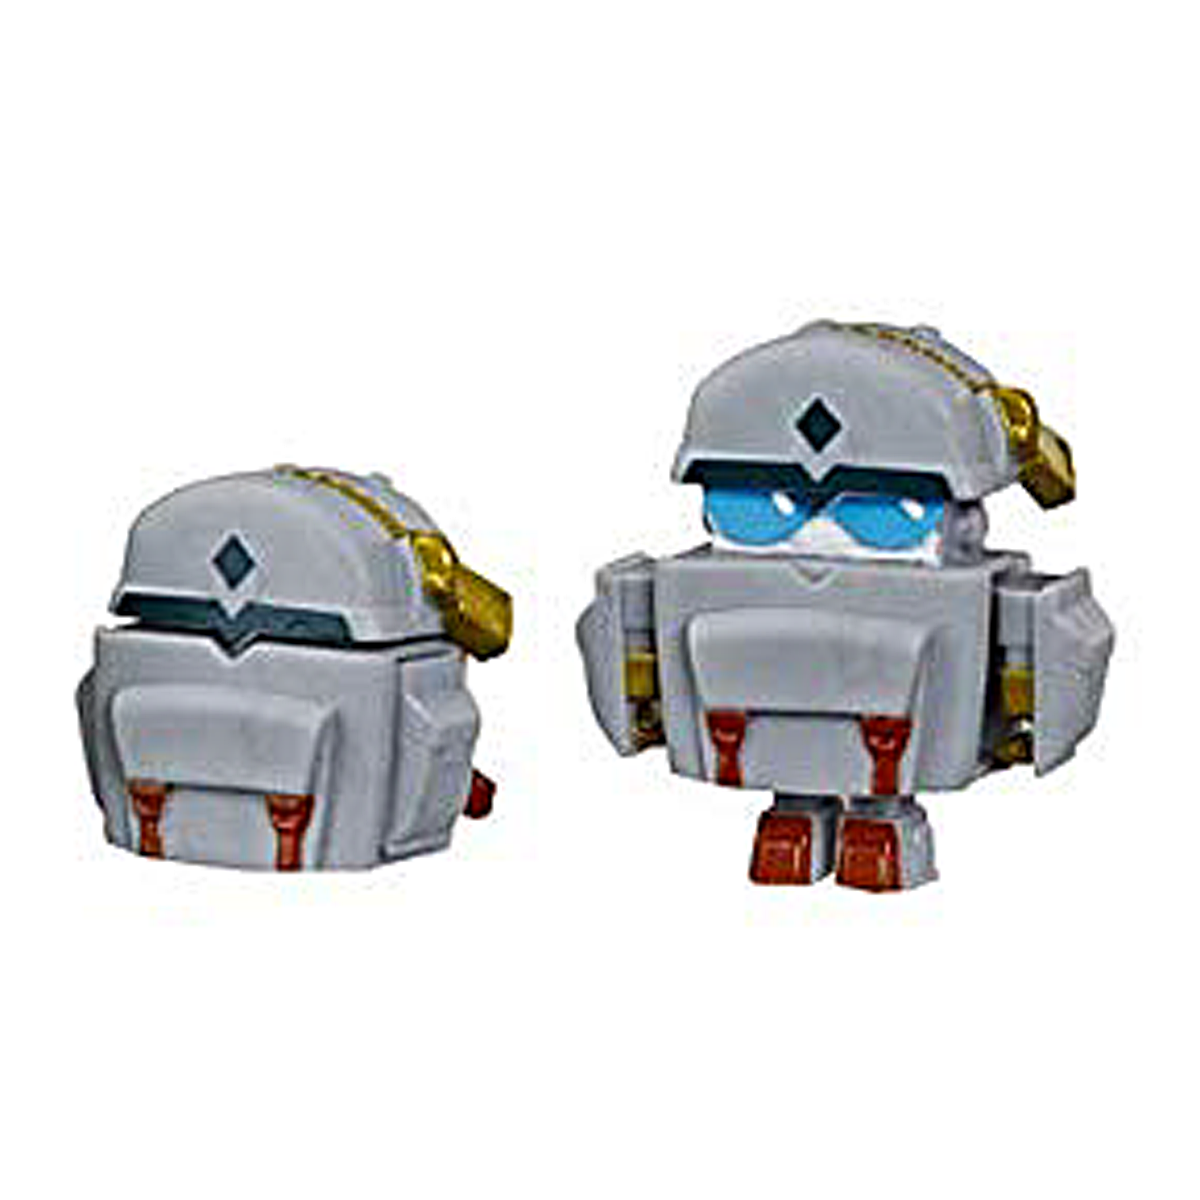 EXCESSORY Transformers BotBots Series 3 Swag Stylers purse backpack handbag 2019